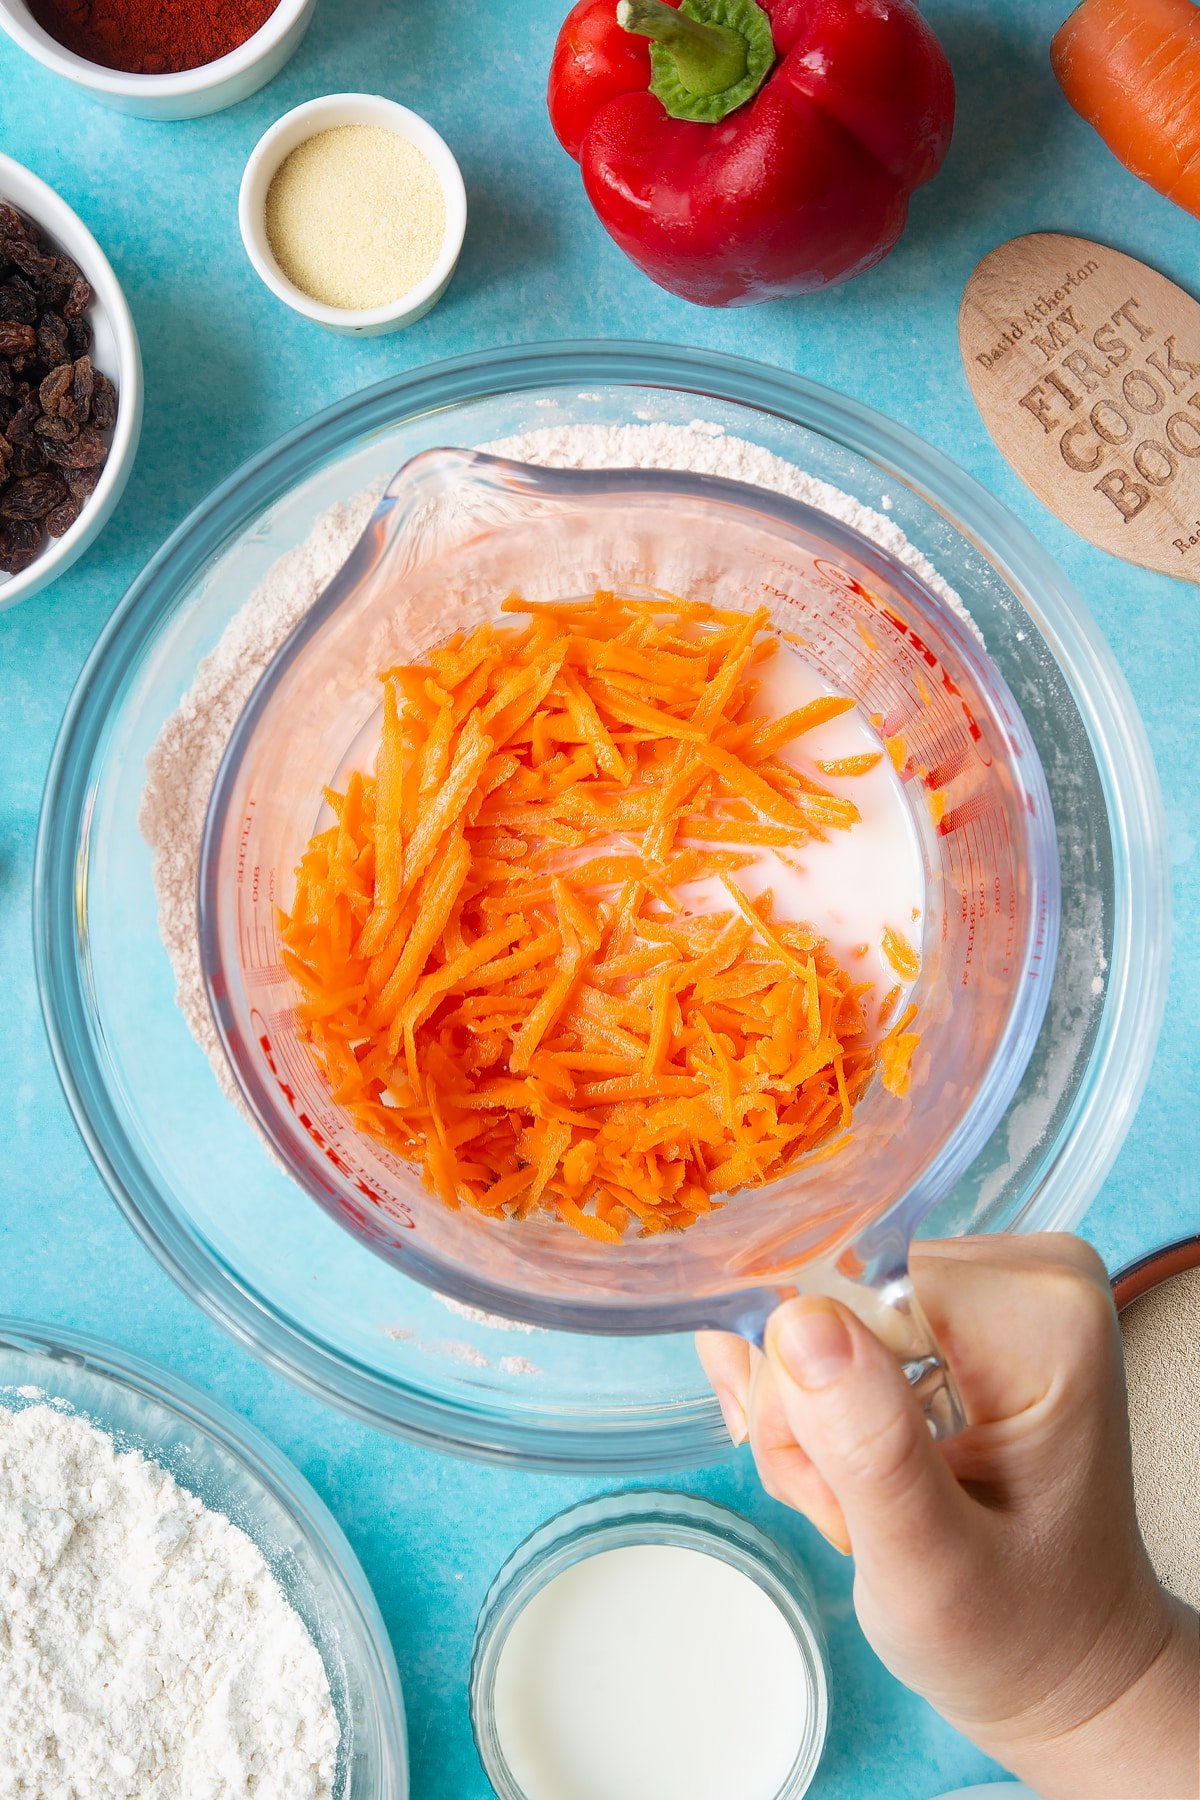 A hand holds a jug containing grated carrot, milk and water. Flour, salt, paprika and yeast are in a mixing bowl below. Ingredients to make bread snakes surround the bowl.